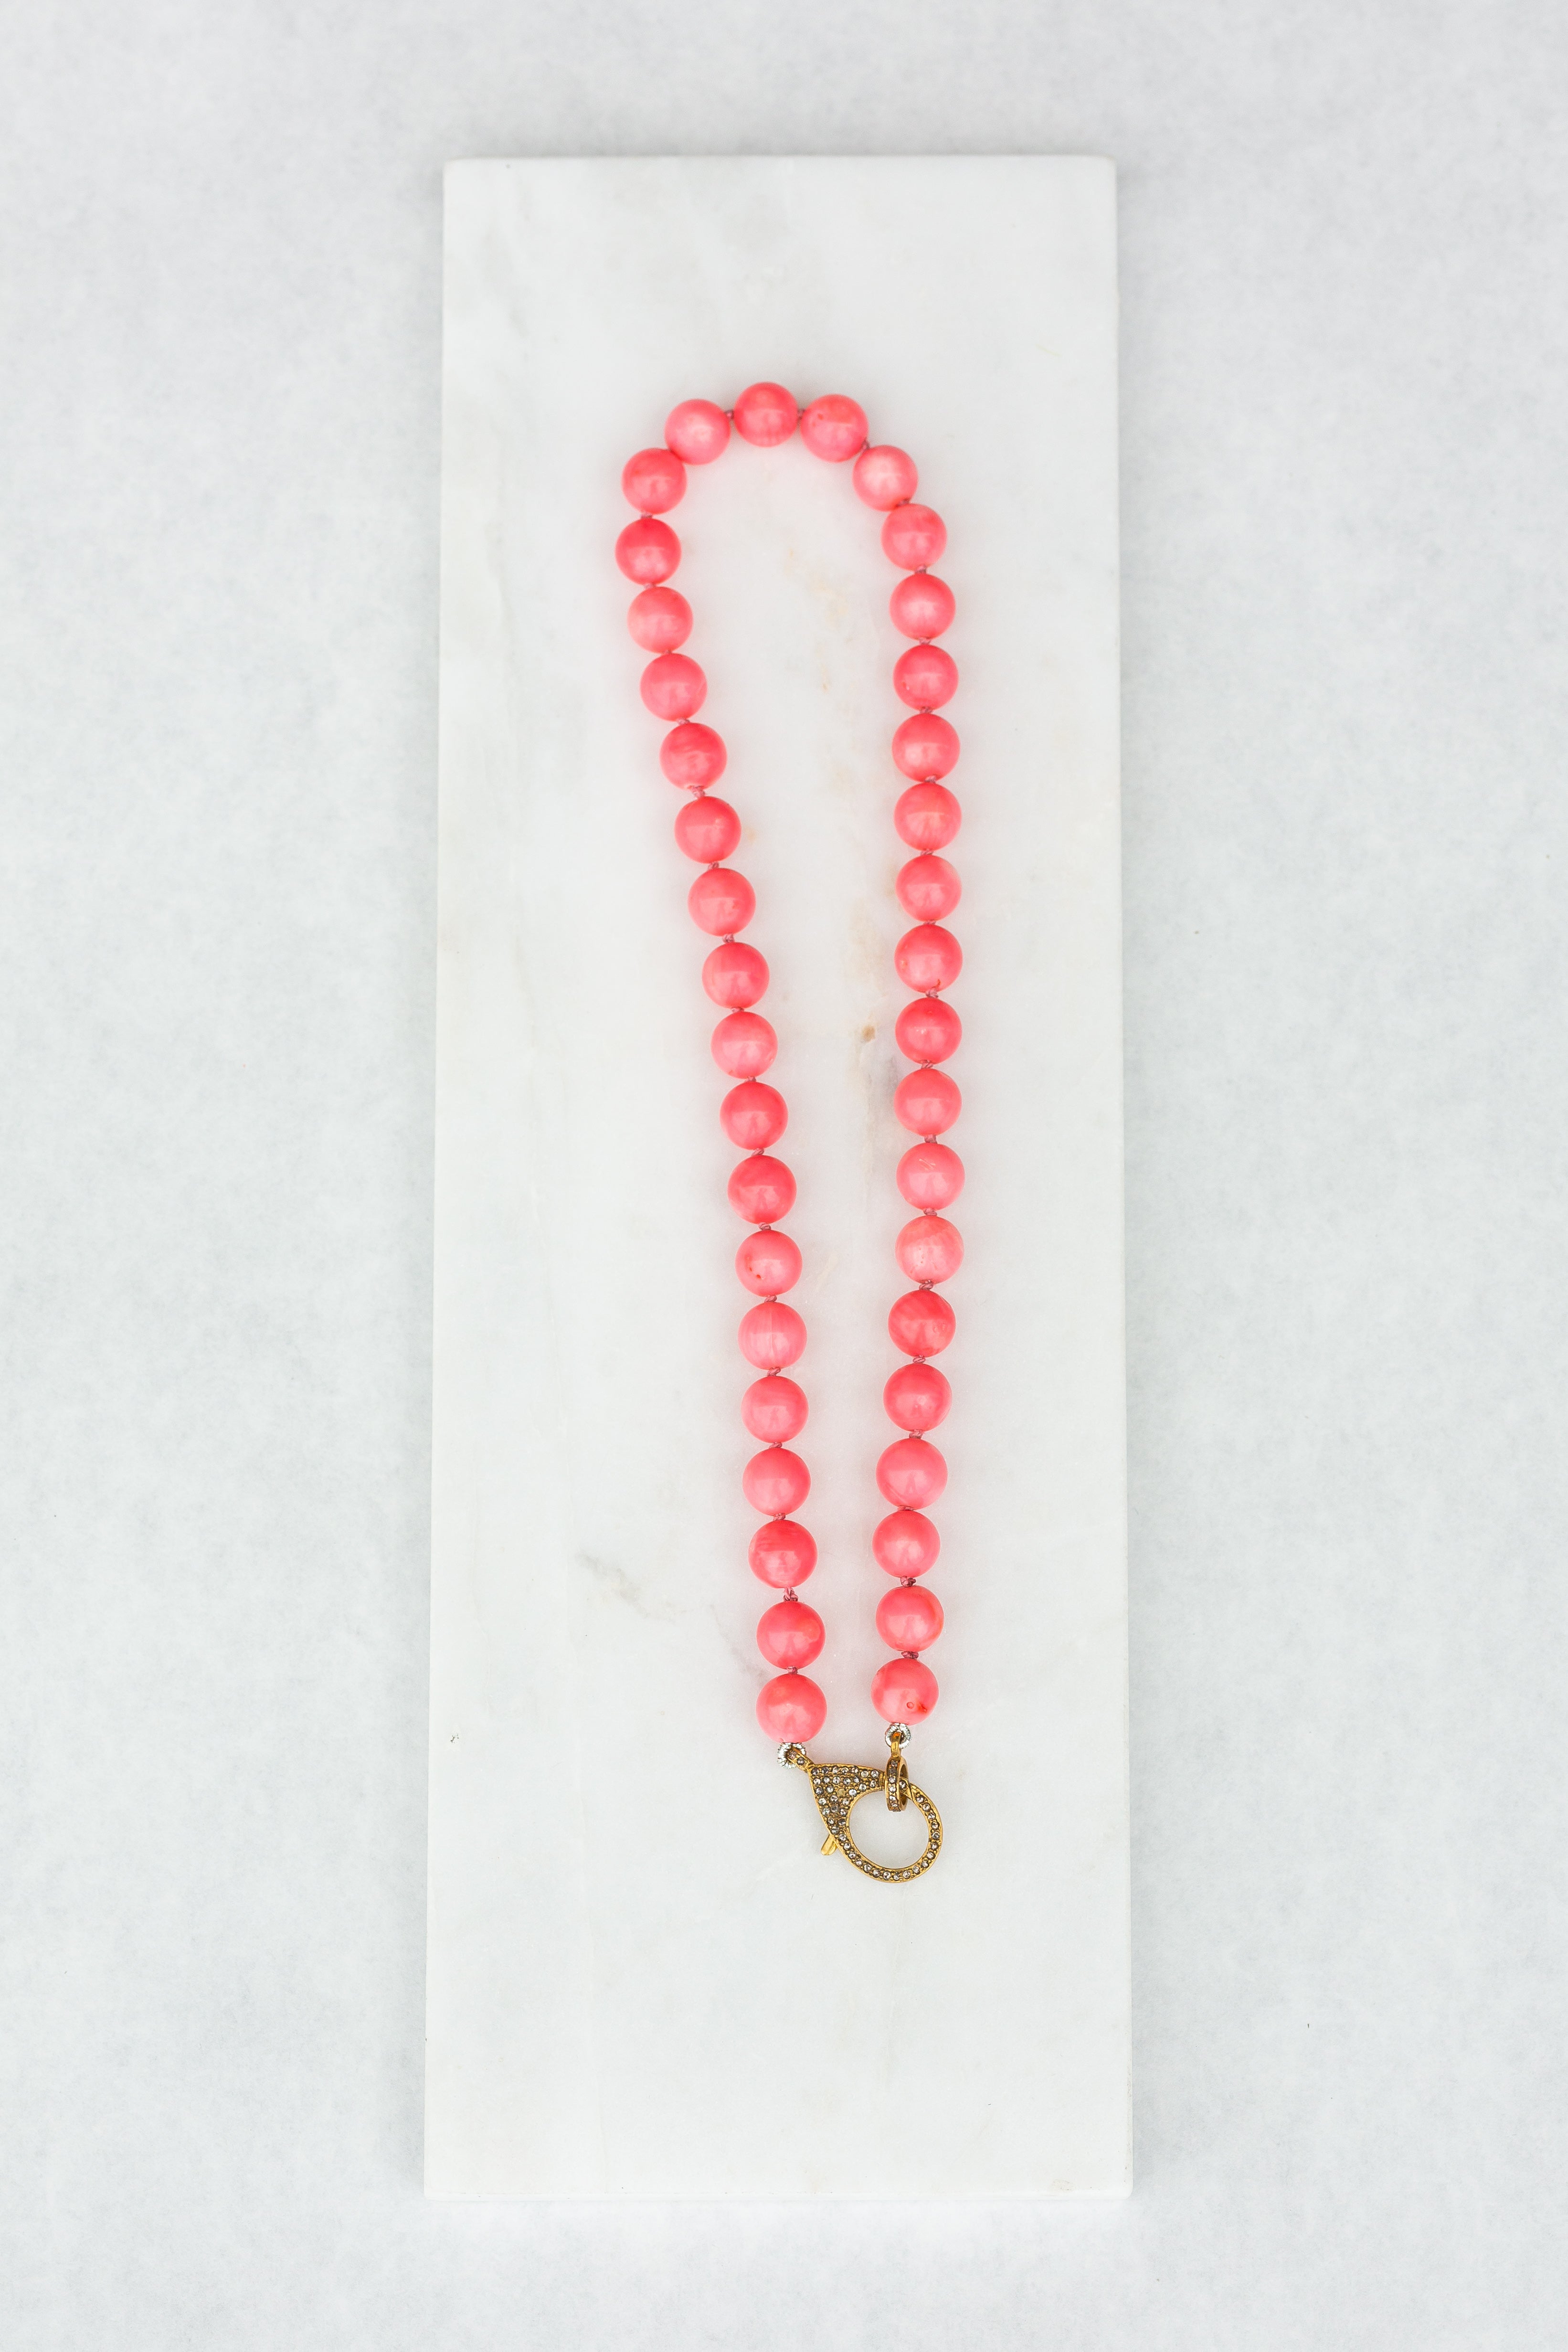 17" Beaded Necklace - Coral Pink